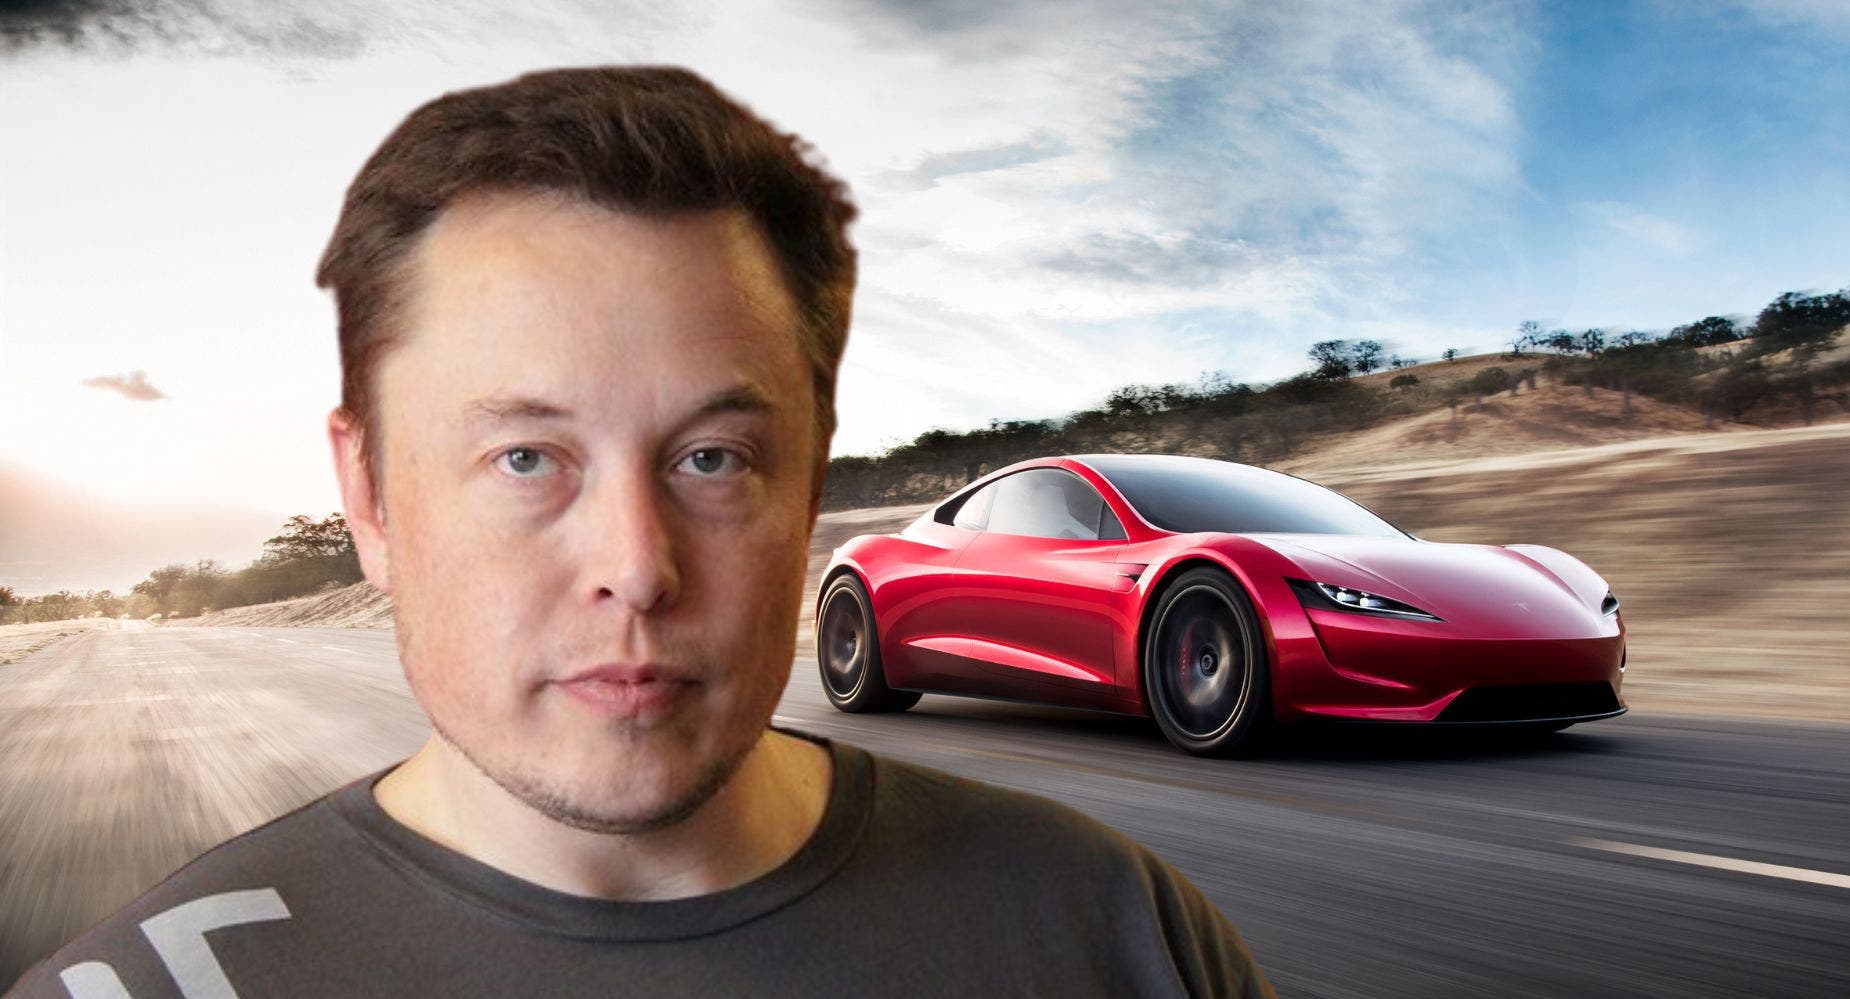 Elon Musk Says Tesla Users Should Be Credited With $100 If This Happens